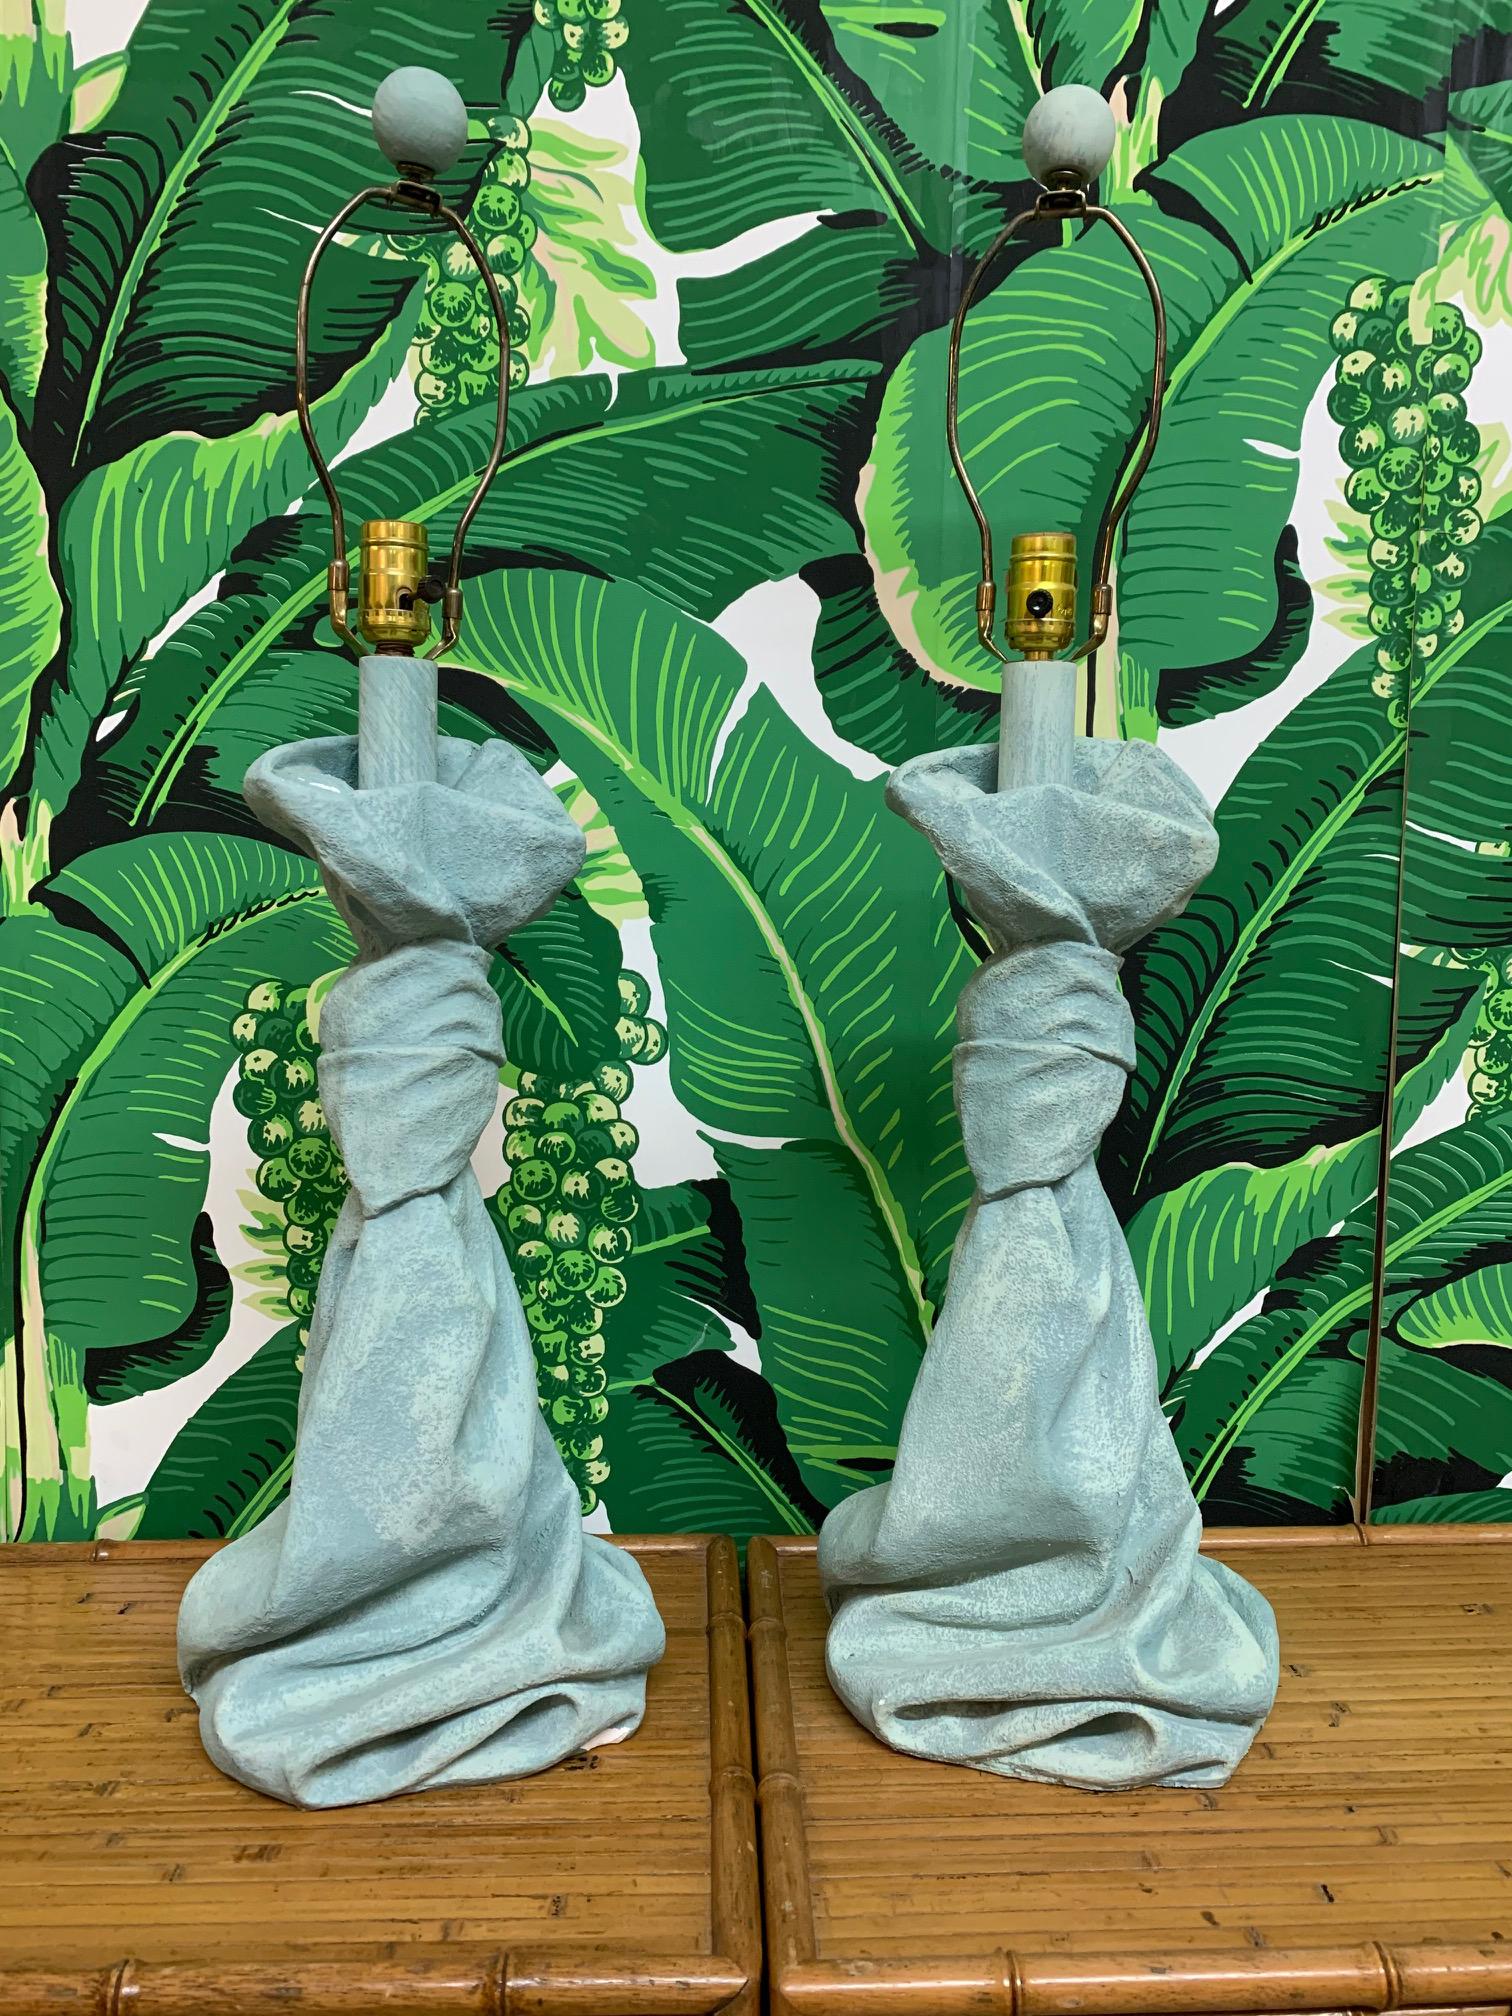 Pair of table lamps in draped fabric motif in the style of John Dickinson. Heavy plaster construction. Good vintage condition with minor imperfections consistent with age. 
        